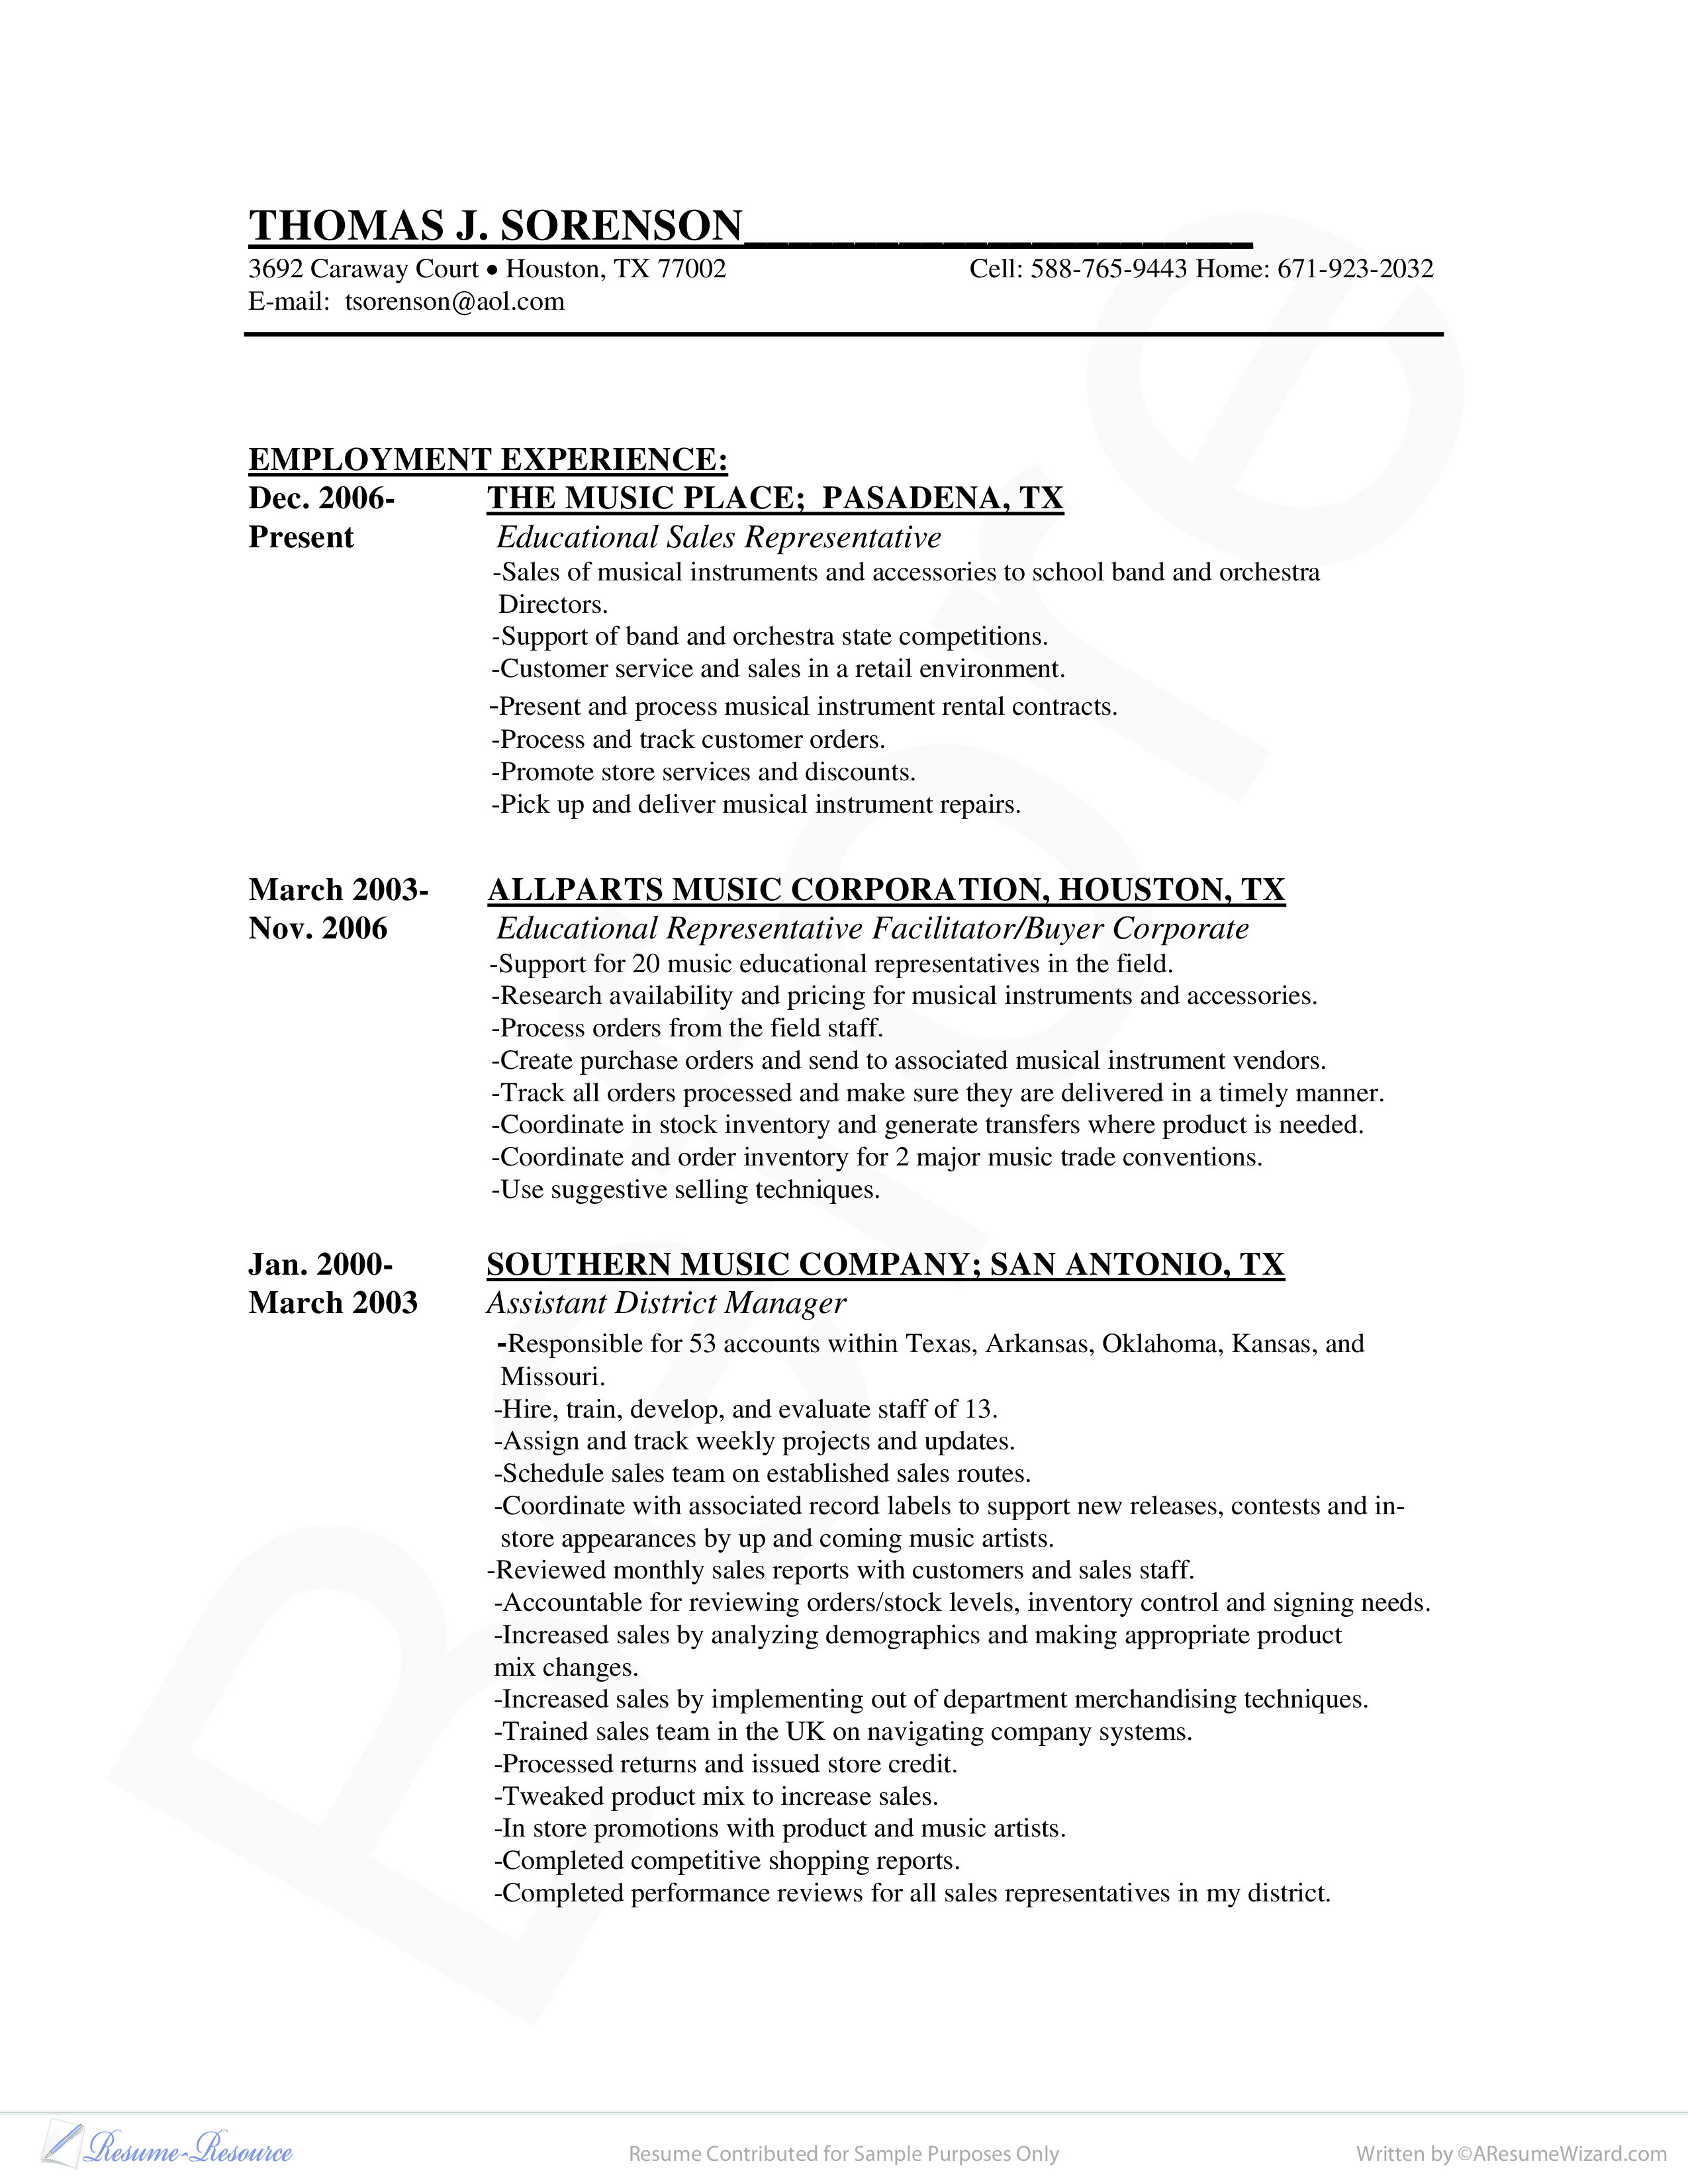 Sales Management Resume - Before And After main image